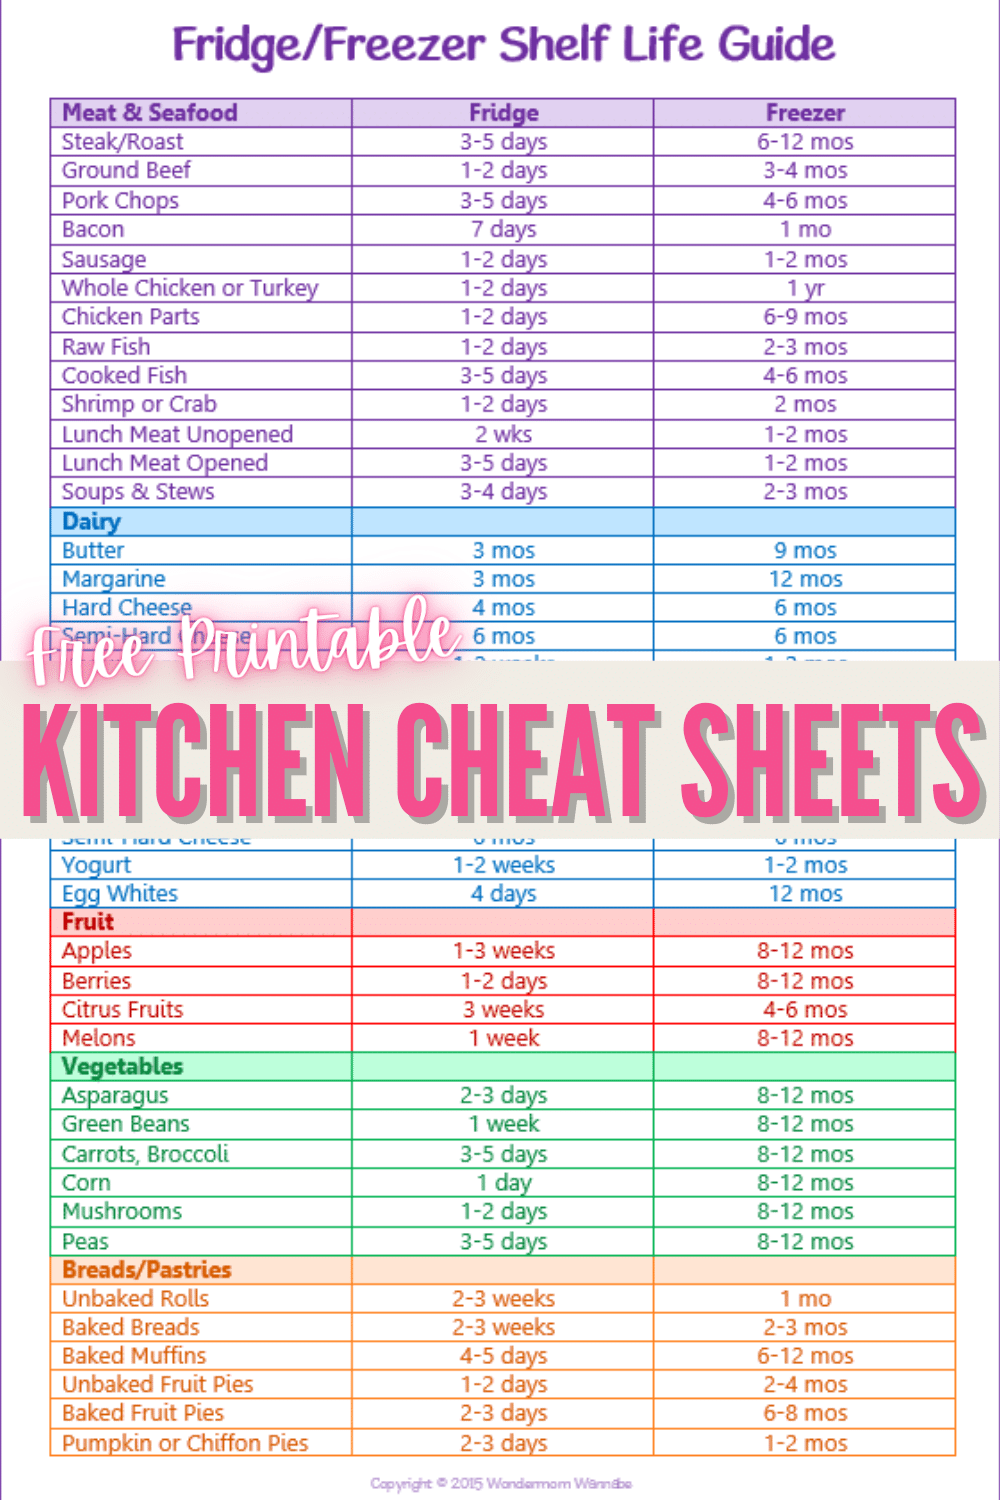 Use these free printable kitchen cheat sheets to easily find conversions and to make sure you discard food that's been around too long. #kitchen #cheatsheets #freeprintable #conversions via @wondermomwannab